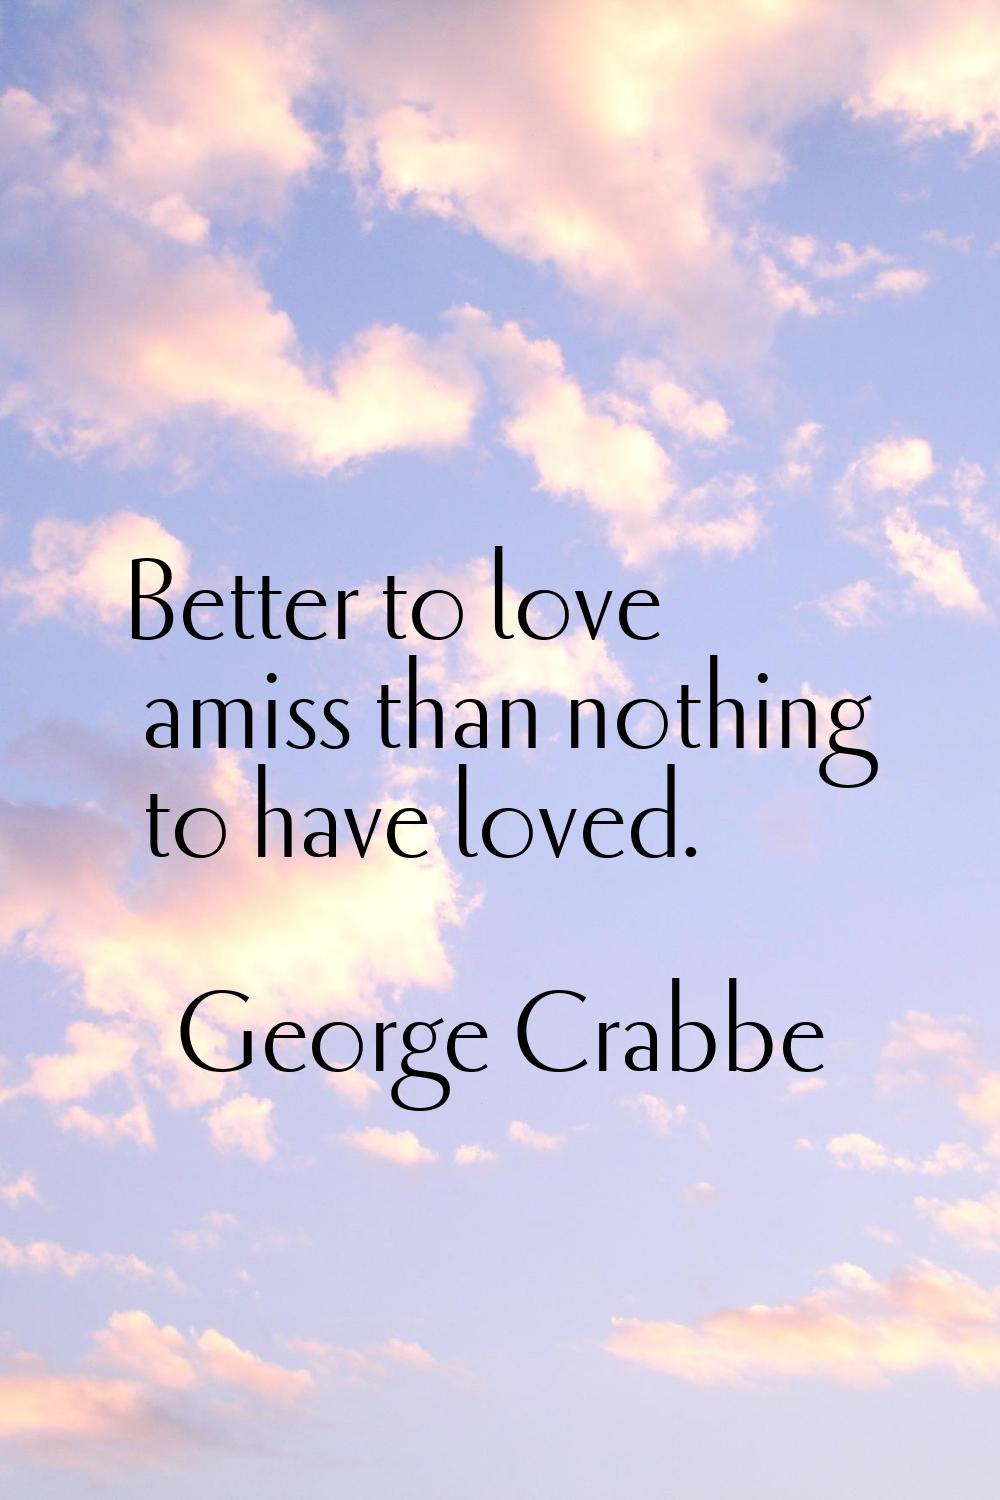 Better to love amiss than nothing to have loved.